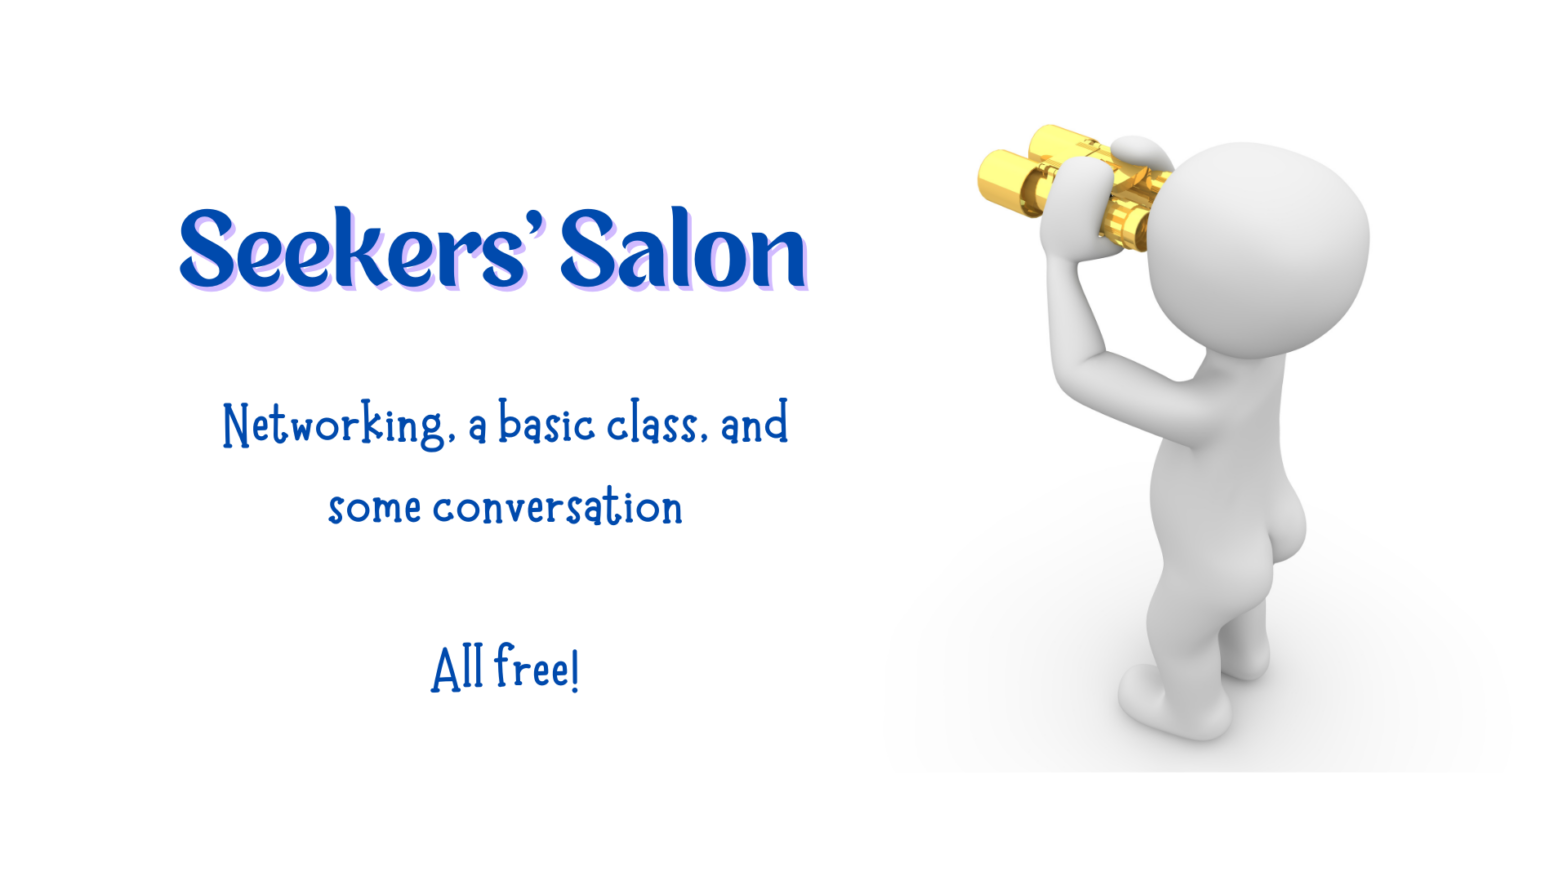 a white generic person-shaped figure holding binoculars, looking away from us. Blue text: Seekers' Salon. Networking, a basic class, and conversation. All free